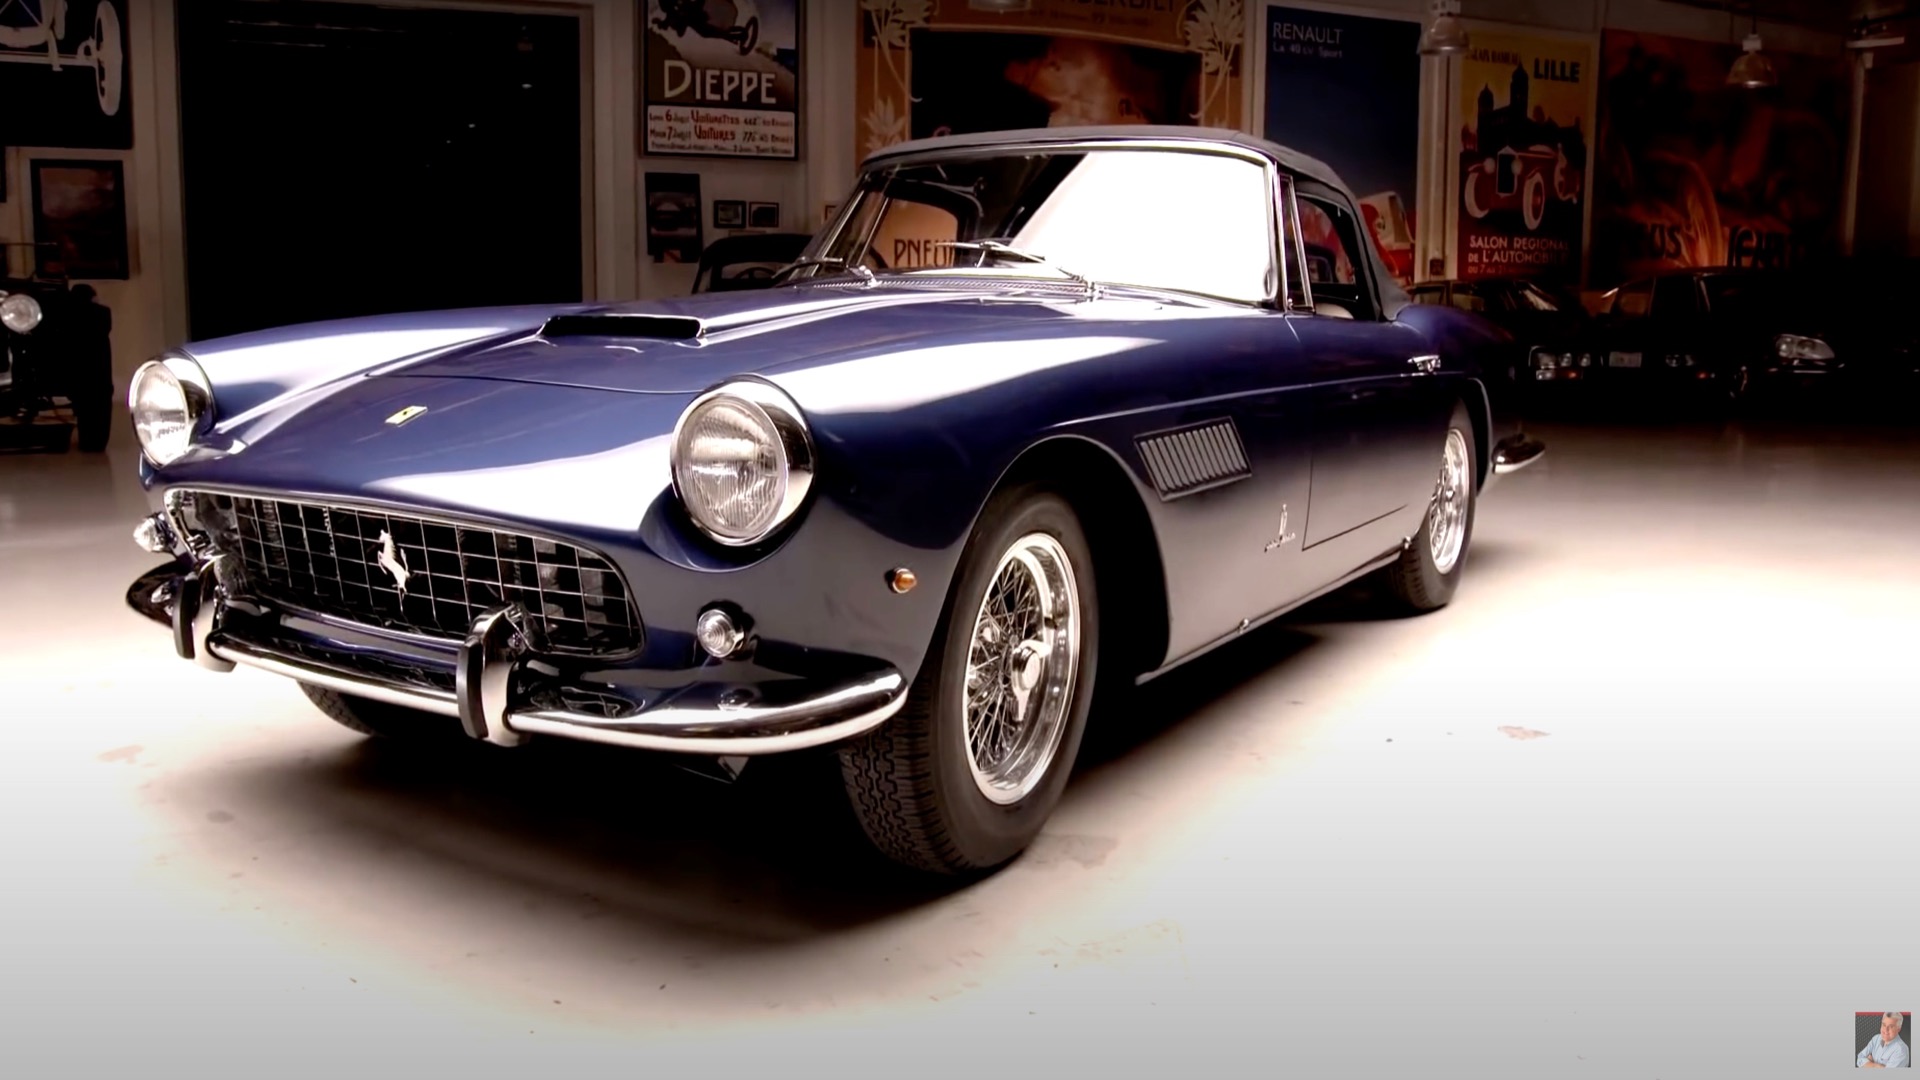 1960 Ferrari 250 PF Cabriolet brings classic style to Jay Leno's 